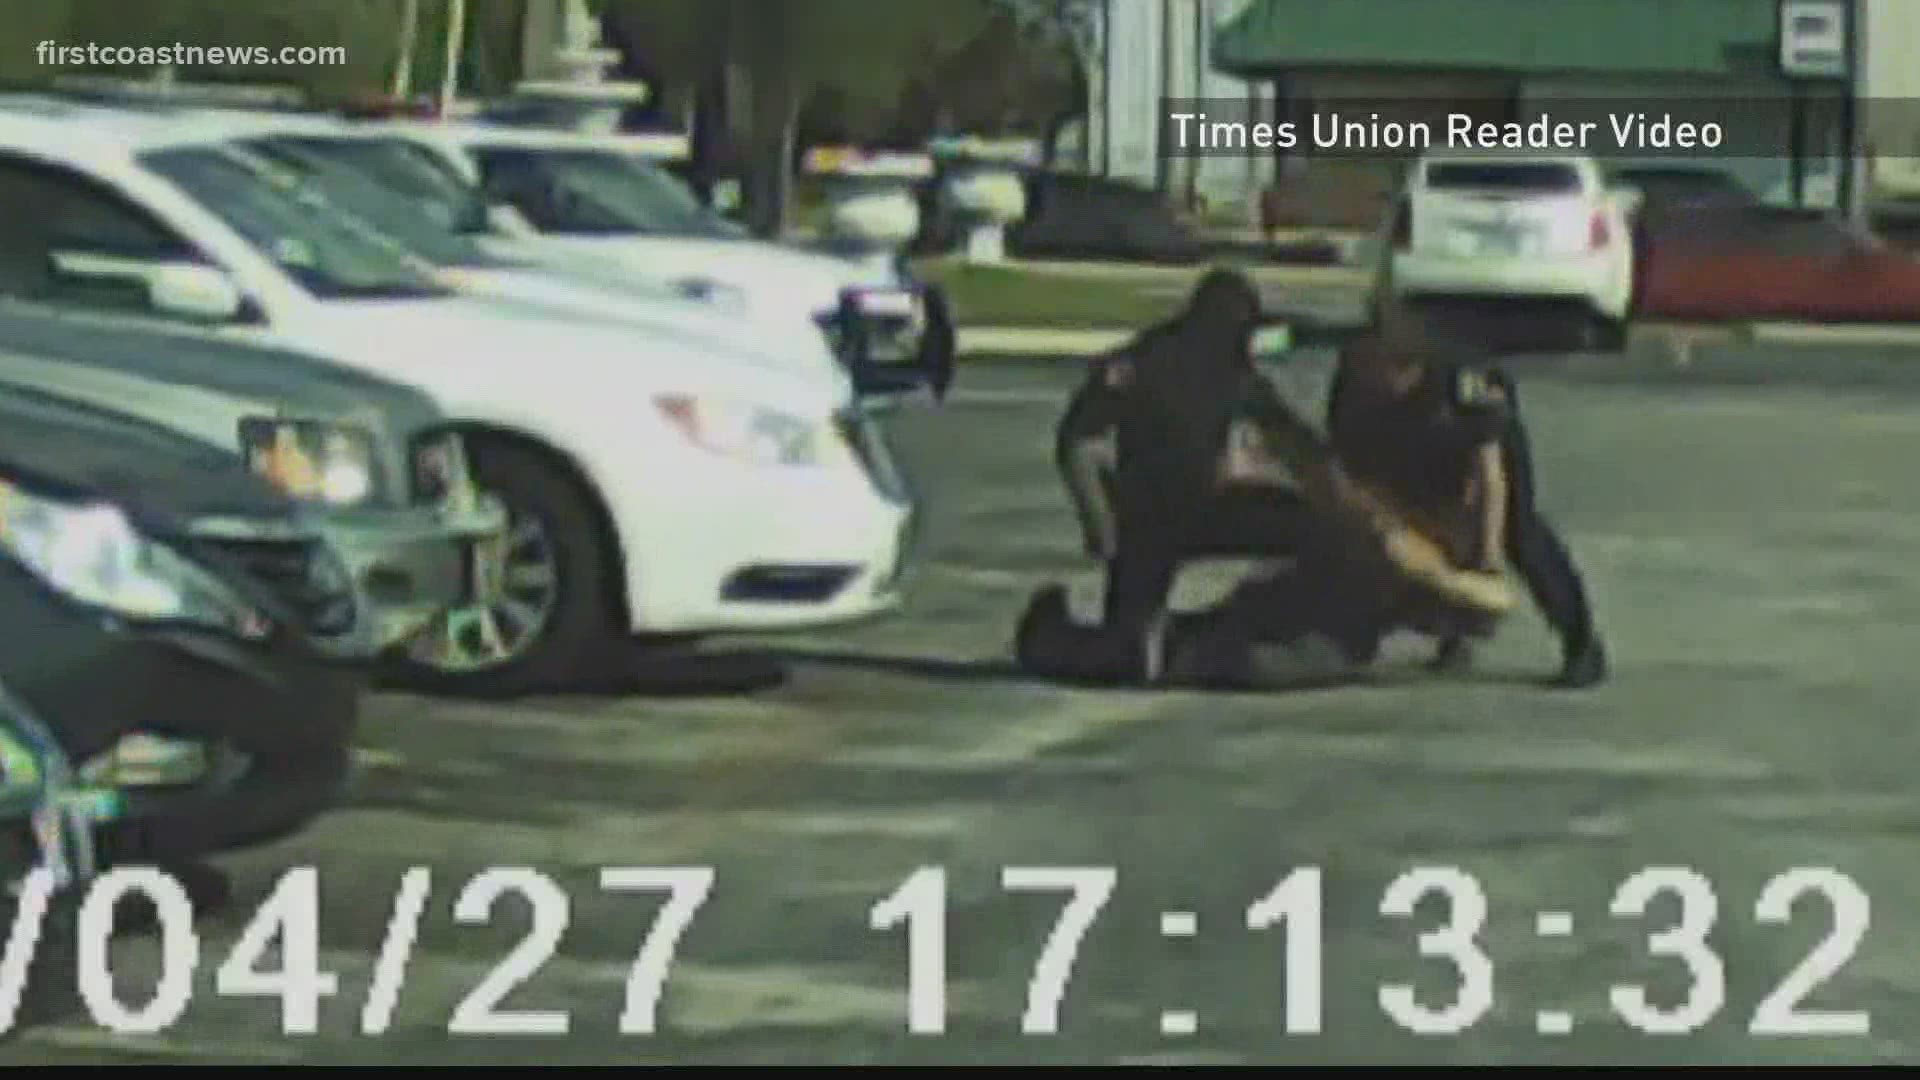 A woman twice beaten by police while handcuffed has settled her lawsuit against the city of Jacksonville, according to her lawyer.